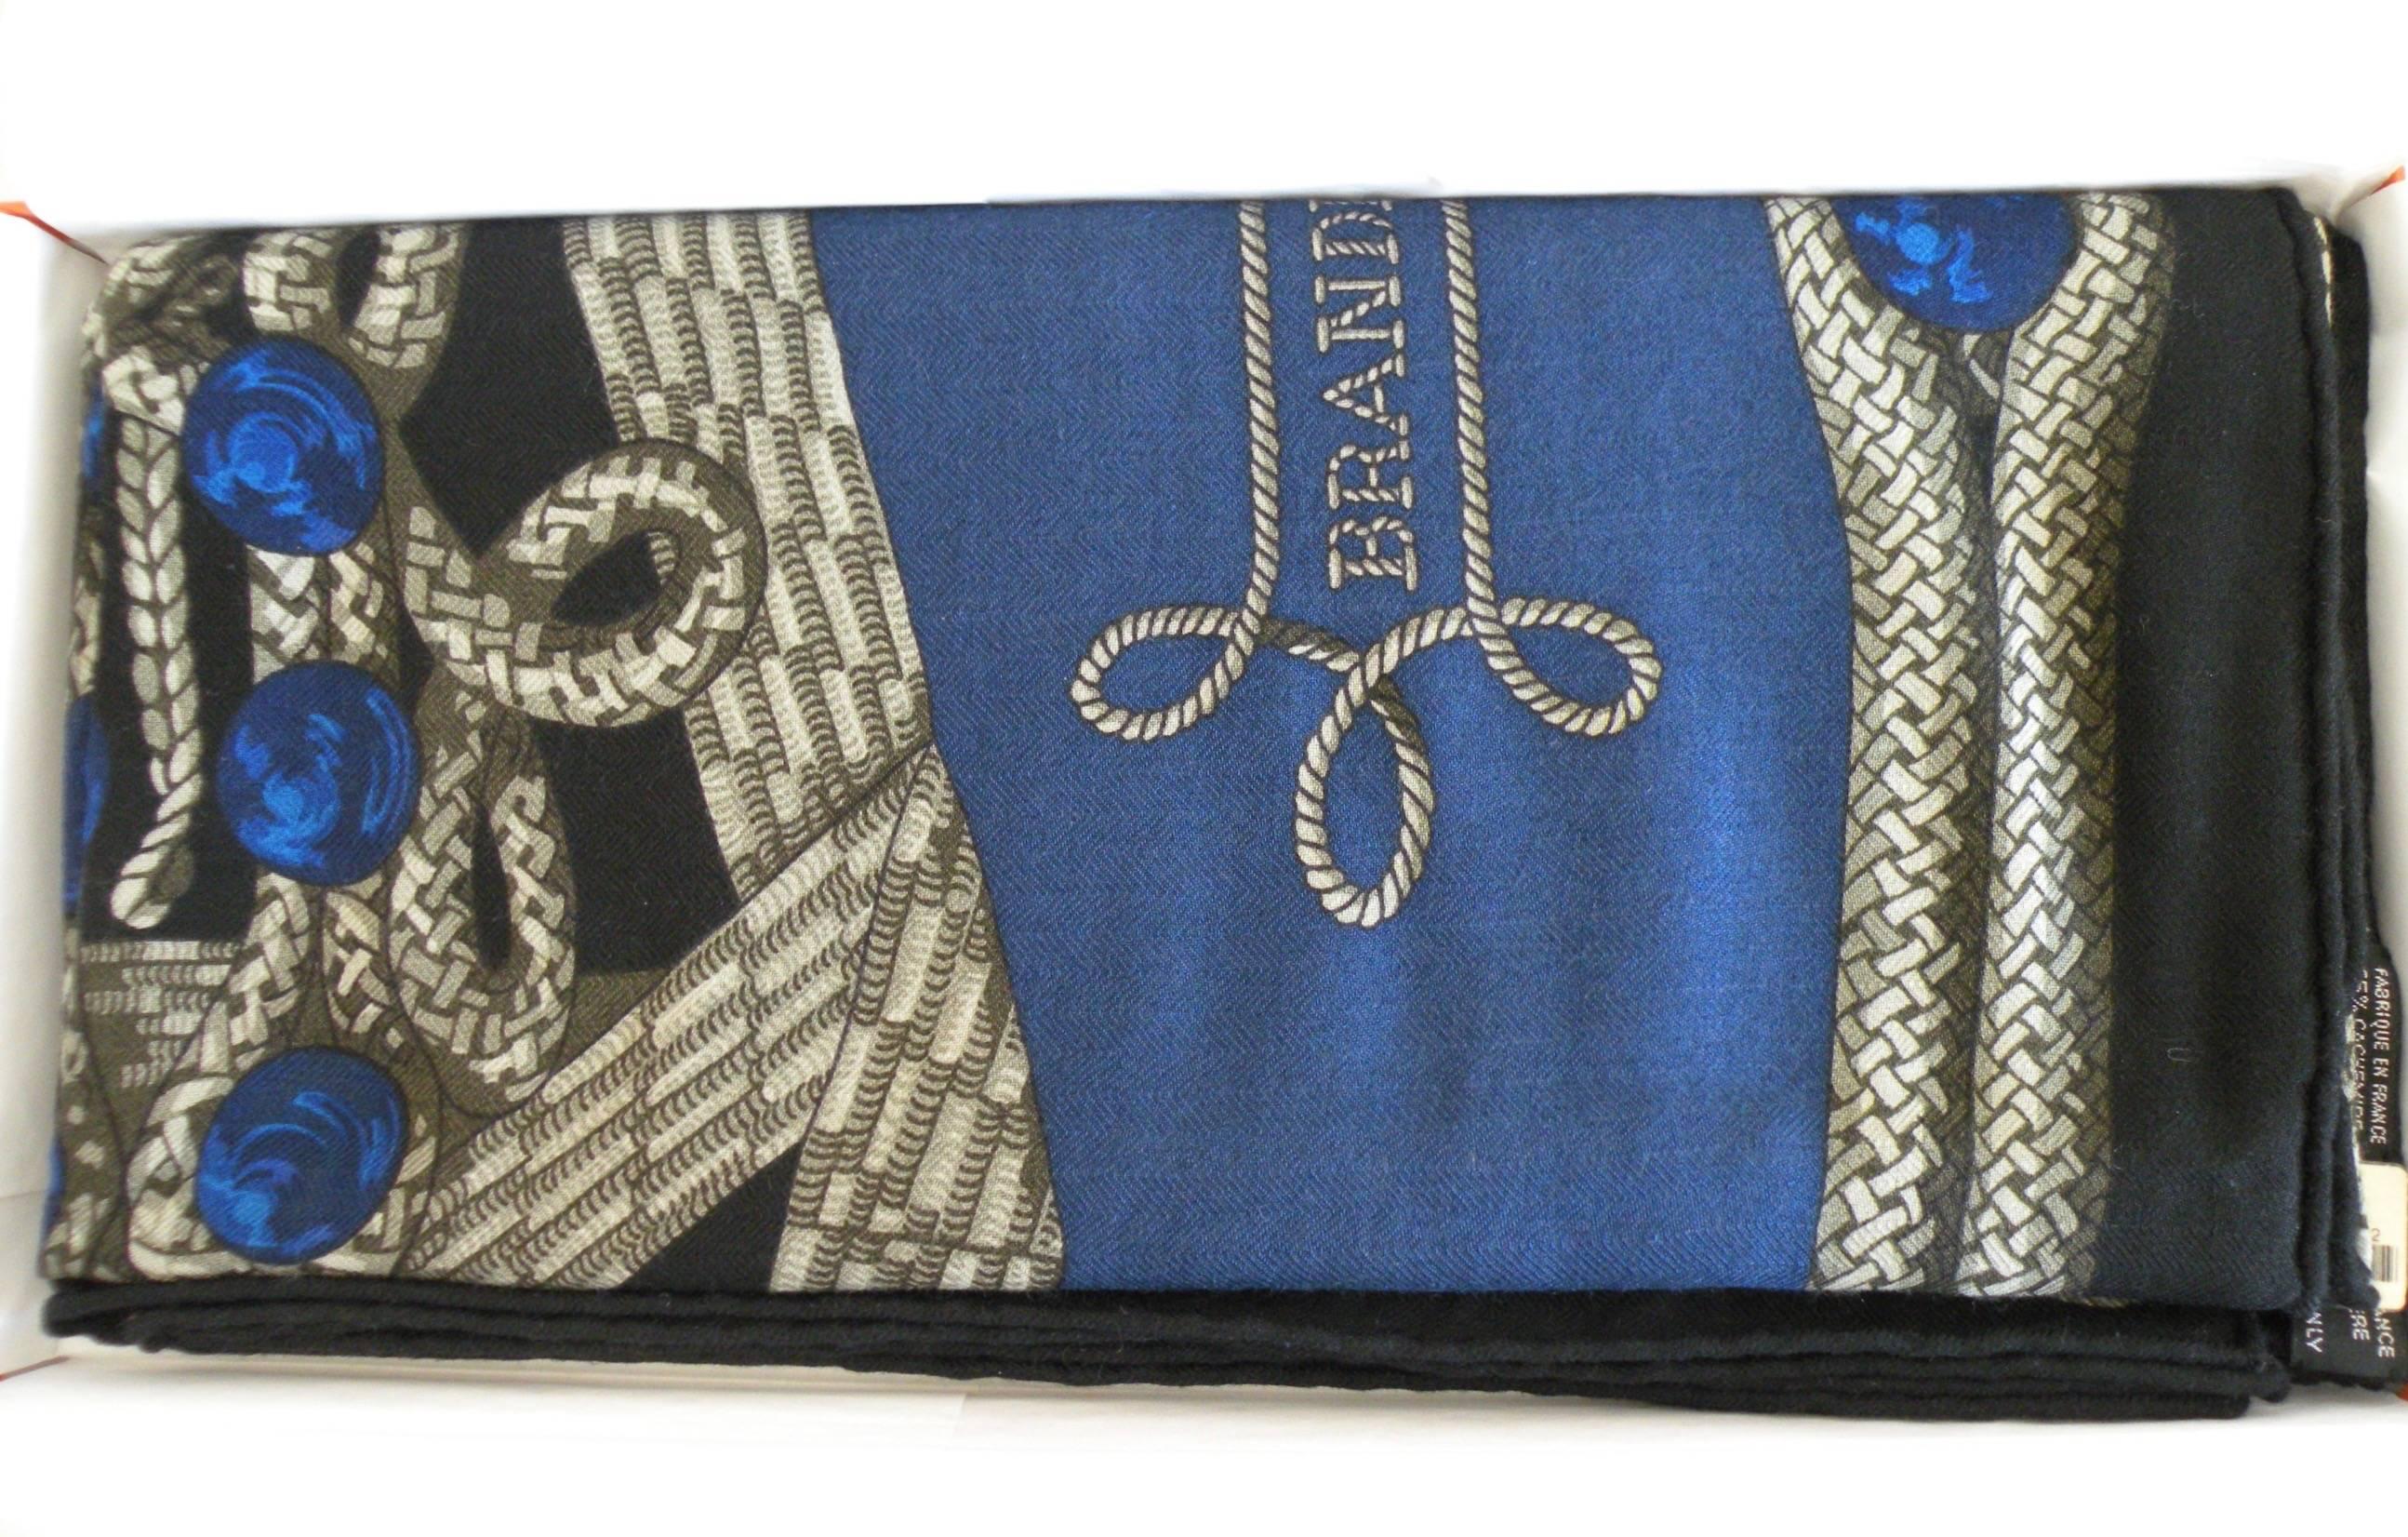 Hermès
Cashmere Shawl
One of the most popular designs, soldout immediatley!

Design: Brandenbourgs
Brand new , never been used

Hermes cashmere and silk scarf, hand-rolled, 55